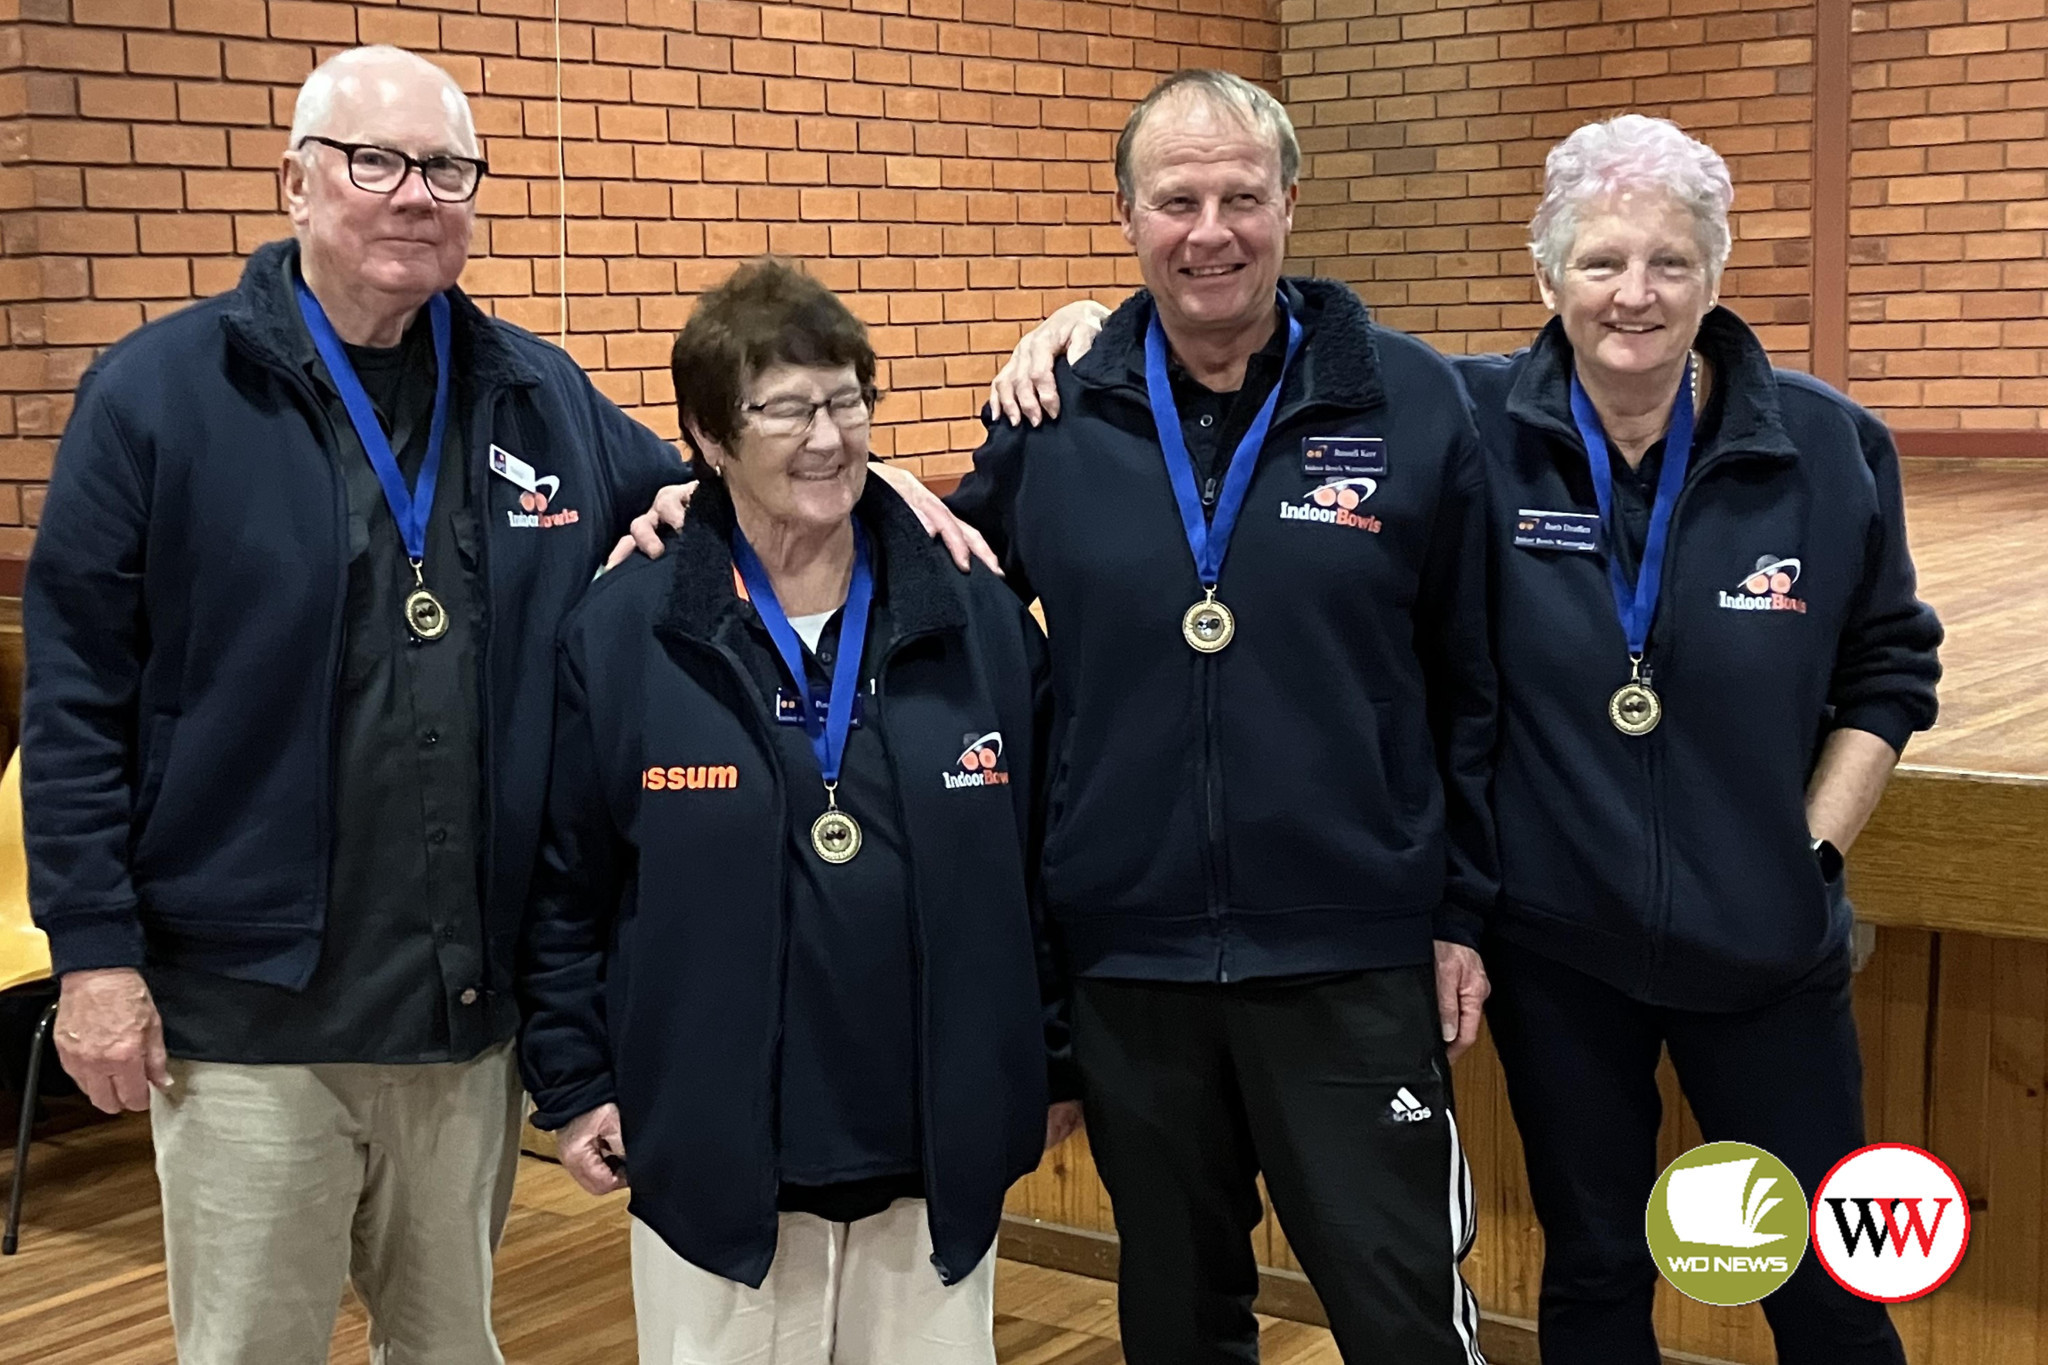 Section two winners, Rob Kermond, Jeannette Robbins, Russell Kerr and Barb Draffen.